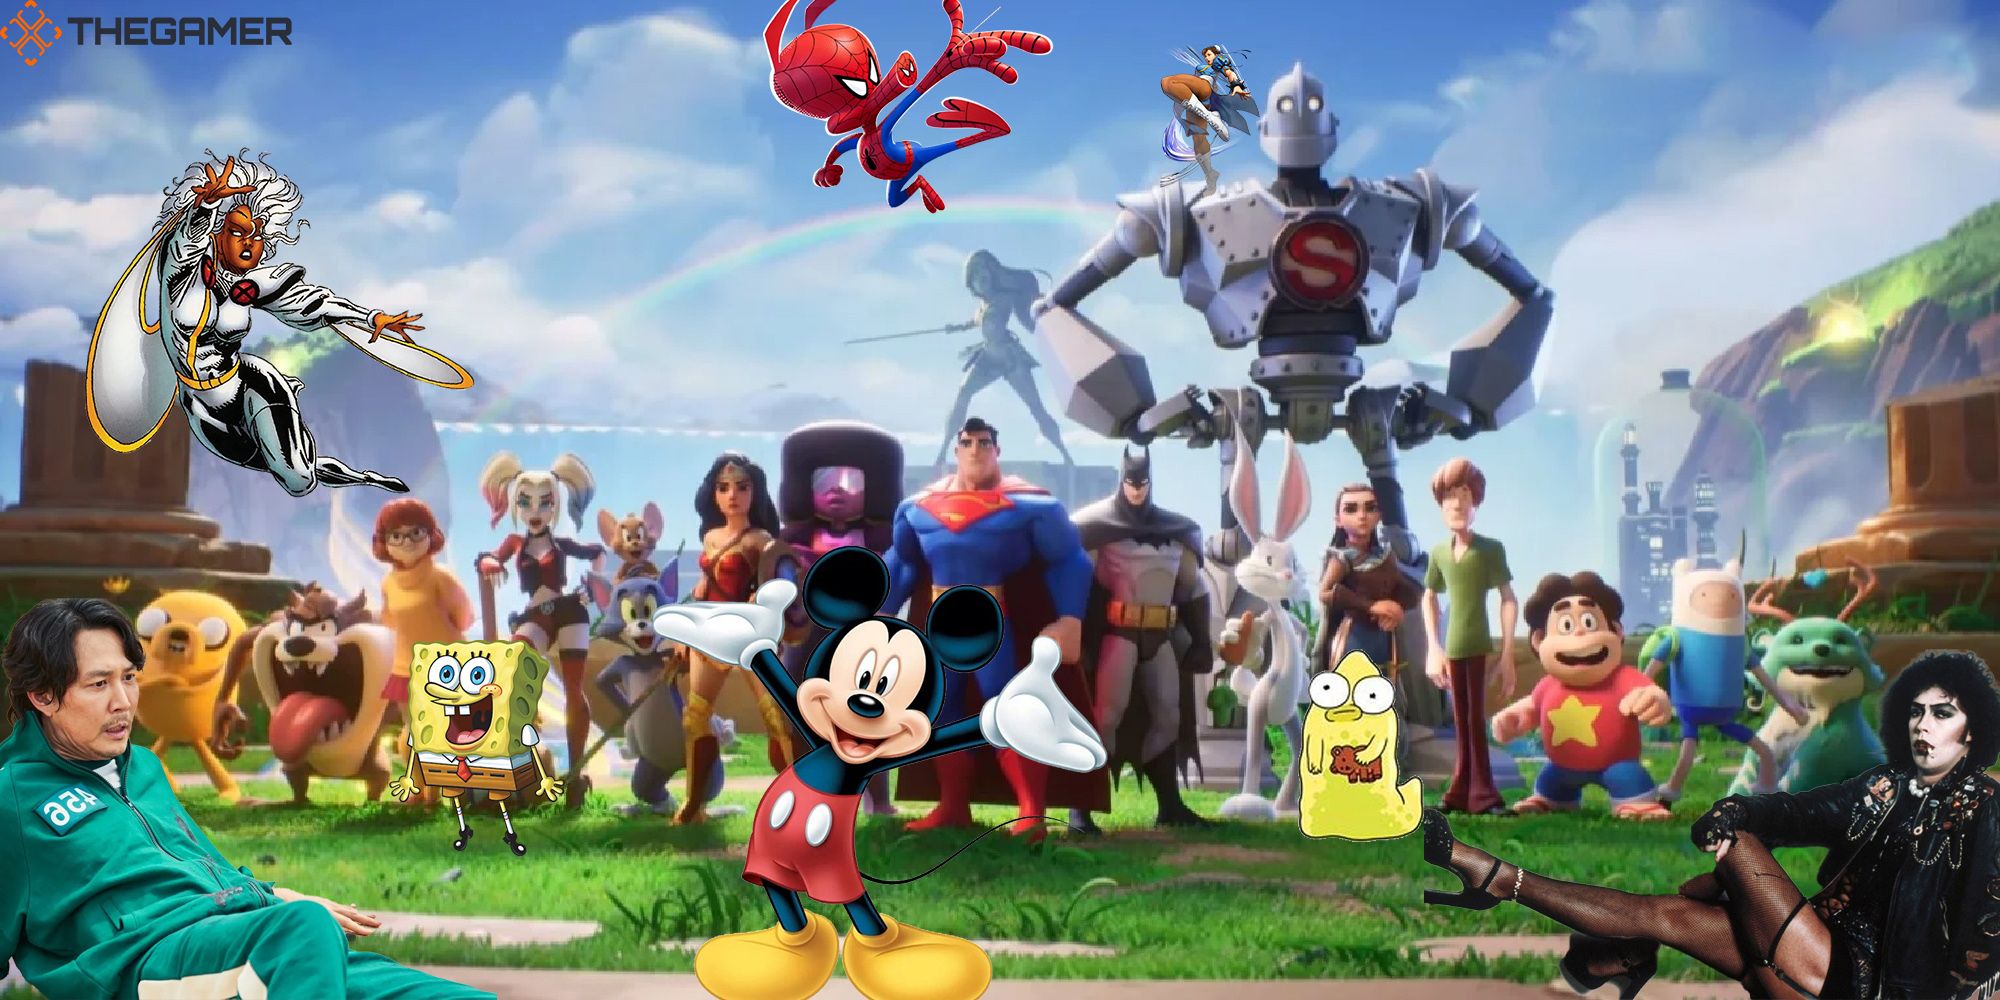 Several characters that are not owned by WarnerMedia, like Mickey Mouse, Frank N Furter, Chun-li, and more, stands on a precipice with the cast of MultiVersus.